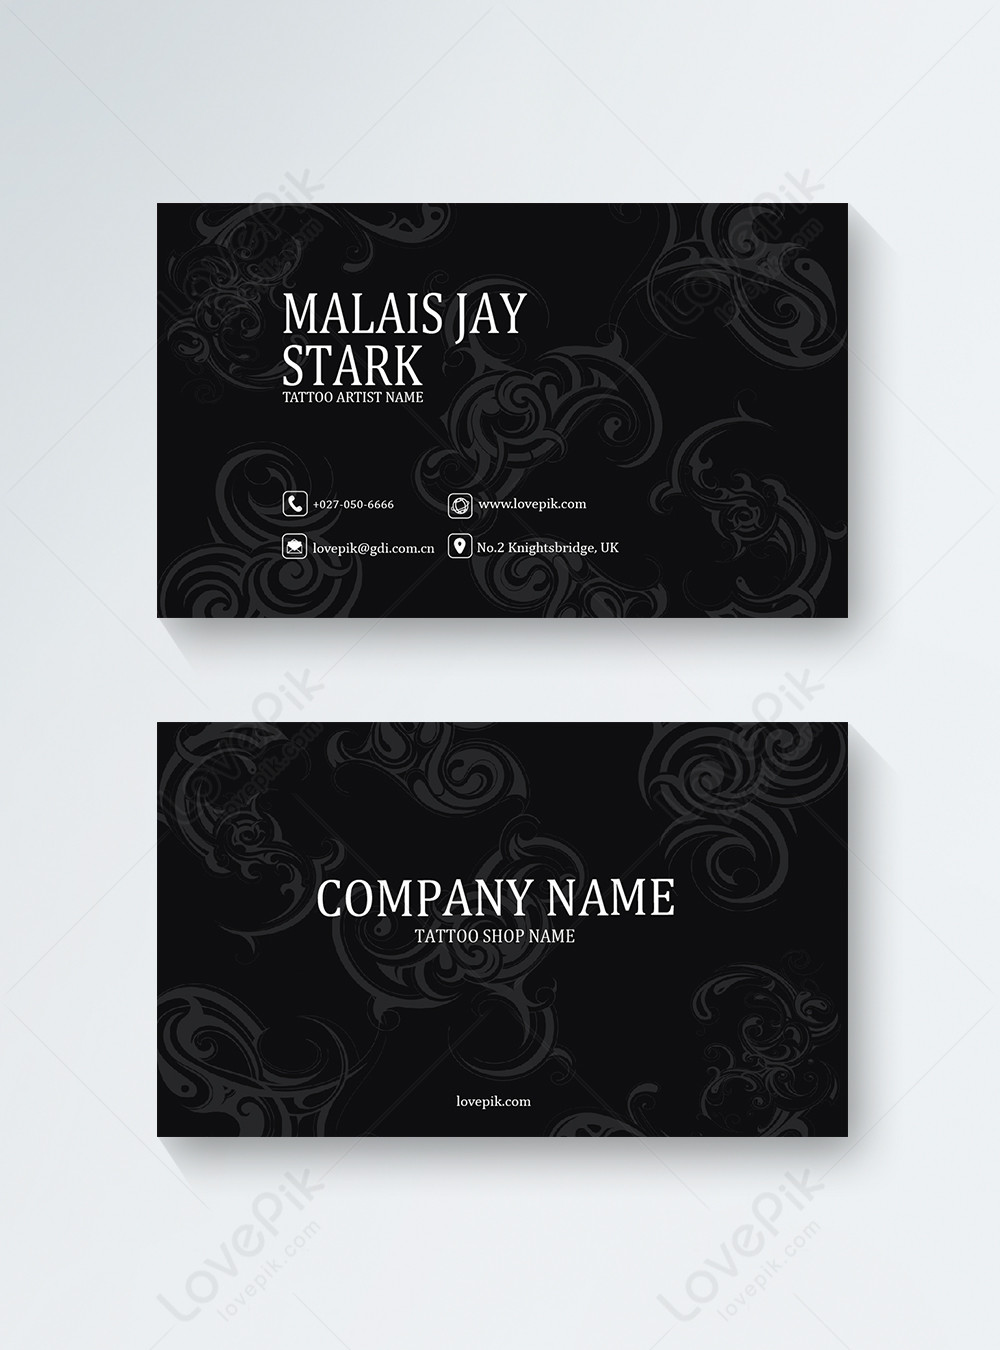 Simple tattoo shop business card template image_picture free download  